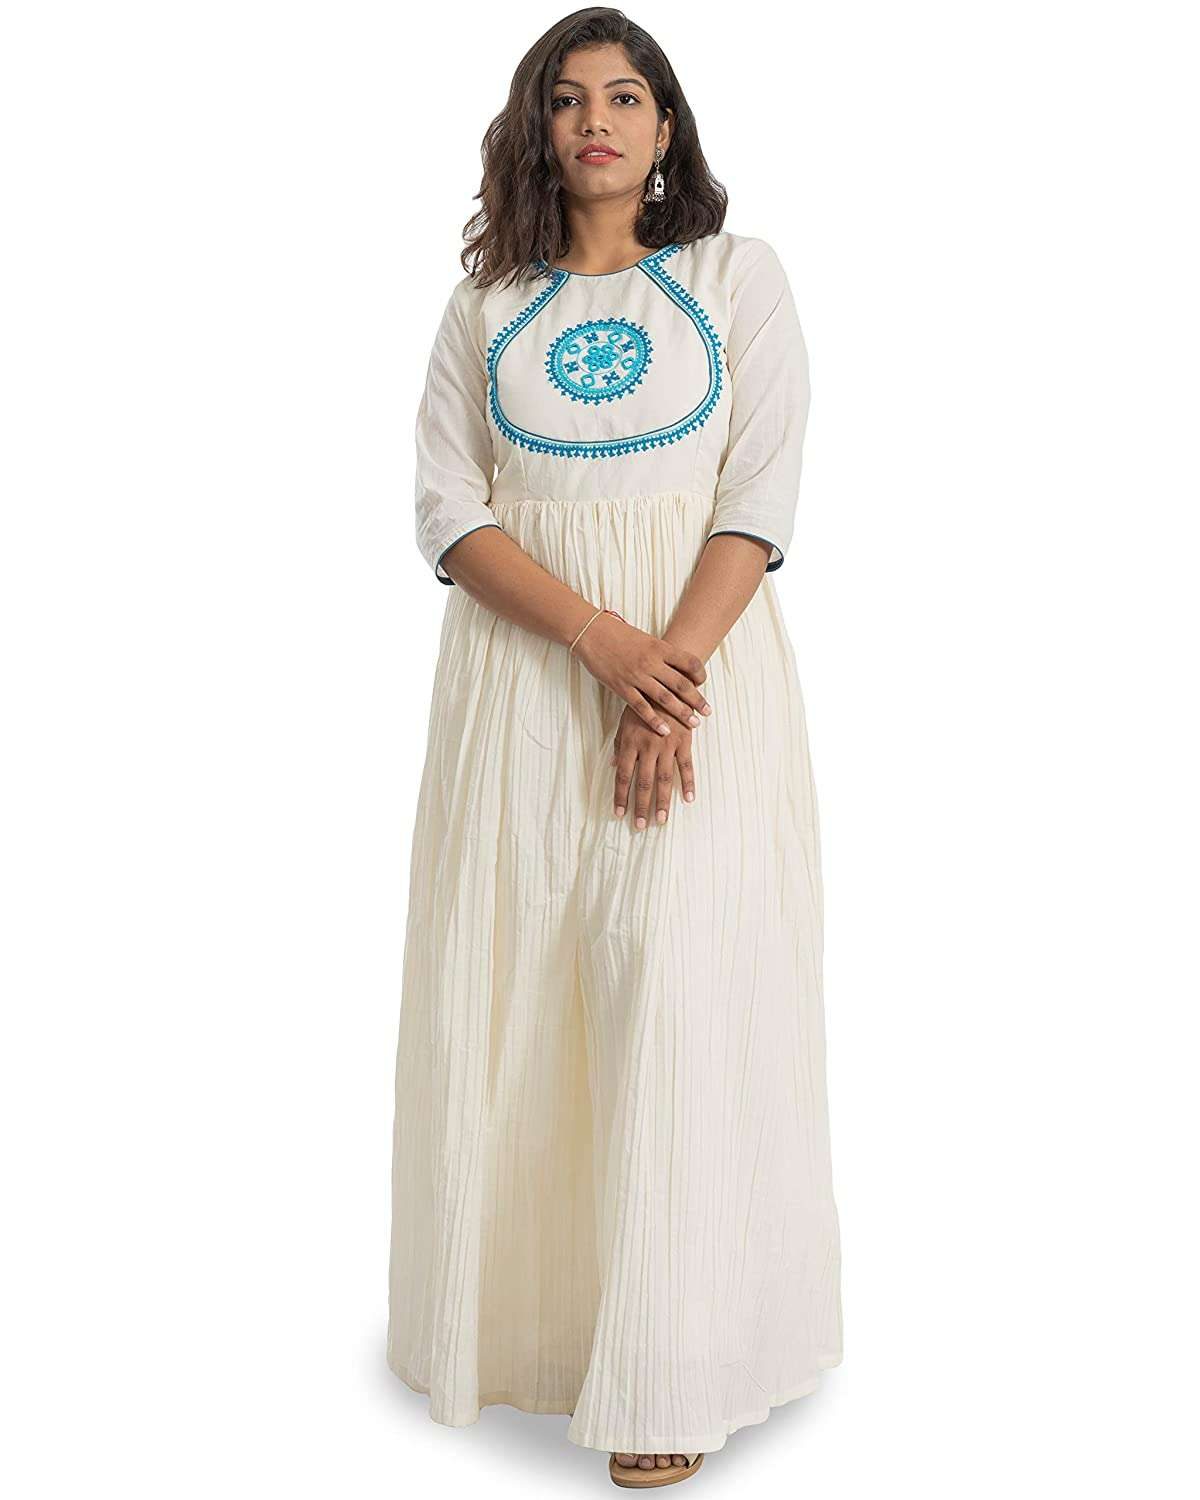 Ridnish Rayon Fabric Designer Coin Lace Attached White Kurti with Double  Pocket and Afghani Salwar Suit Set for Women and Girls (Medium) :  Amazon.in: Fashion